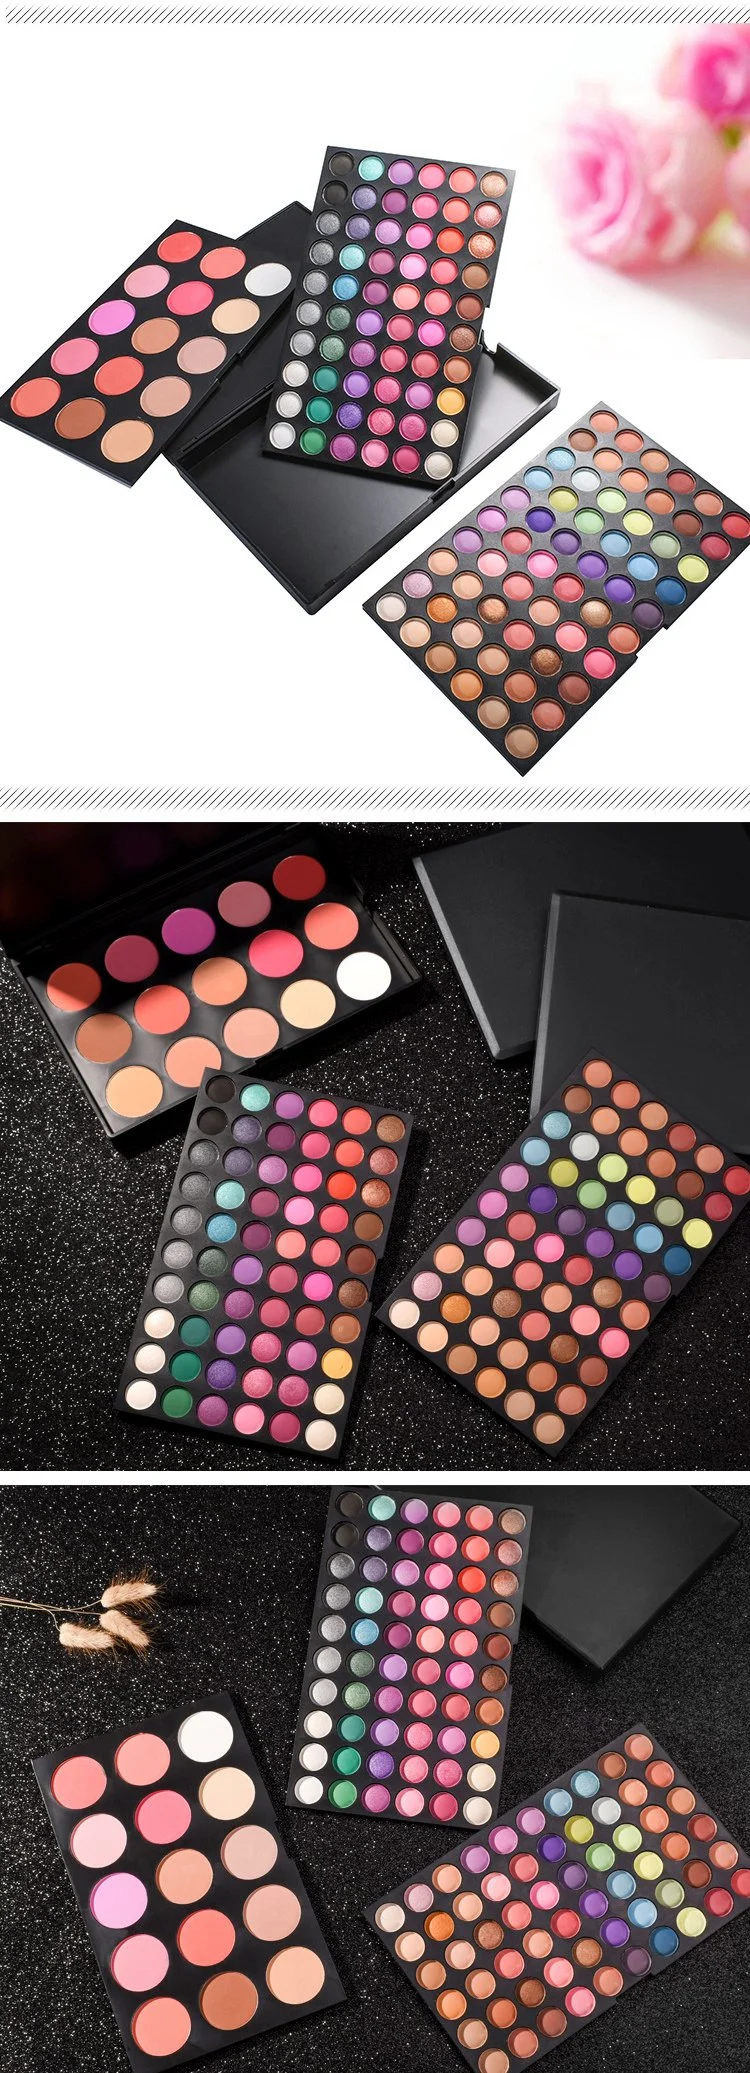 Occident Pearly Matte 3-Layer Practical Blush Eye Shadow Makeup Palette 135 Color Eye Shadow Palette